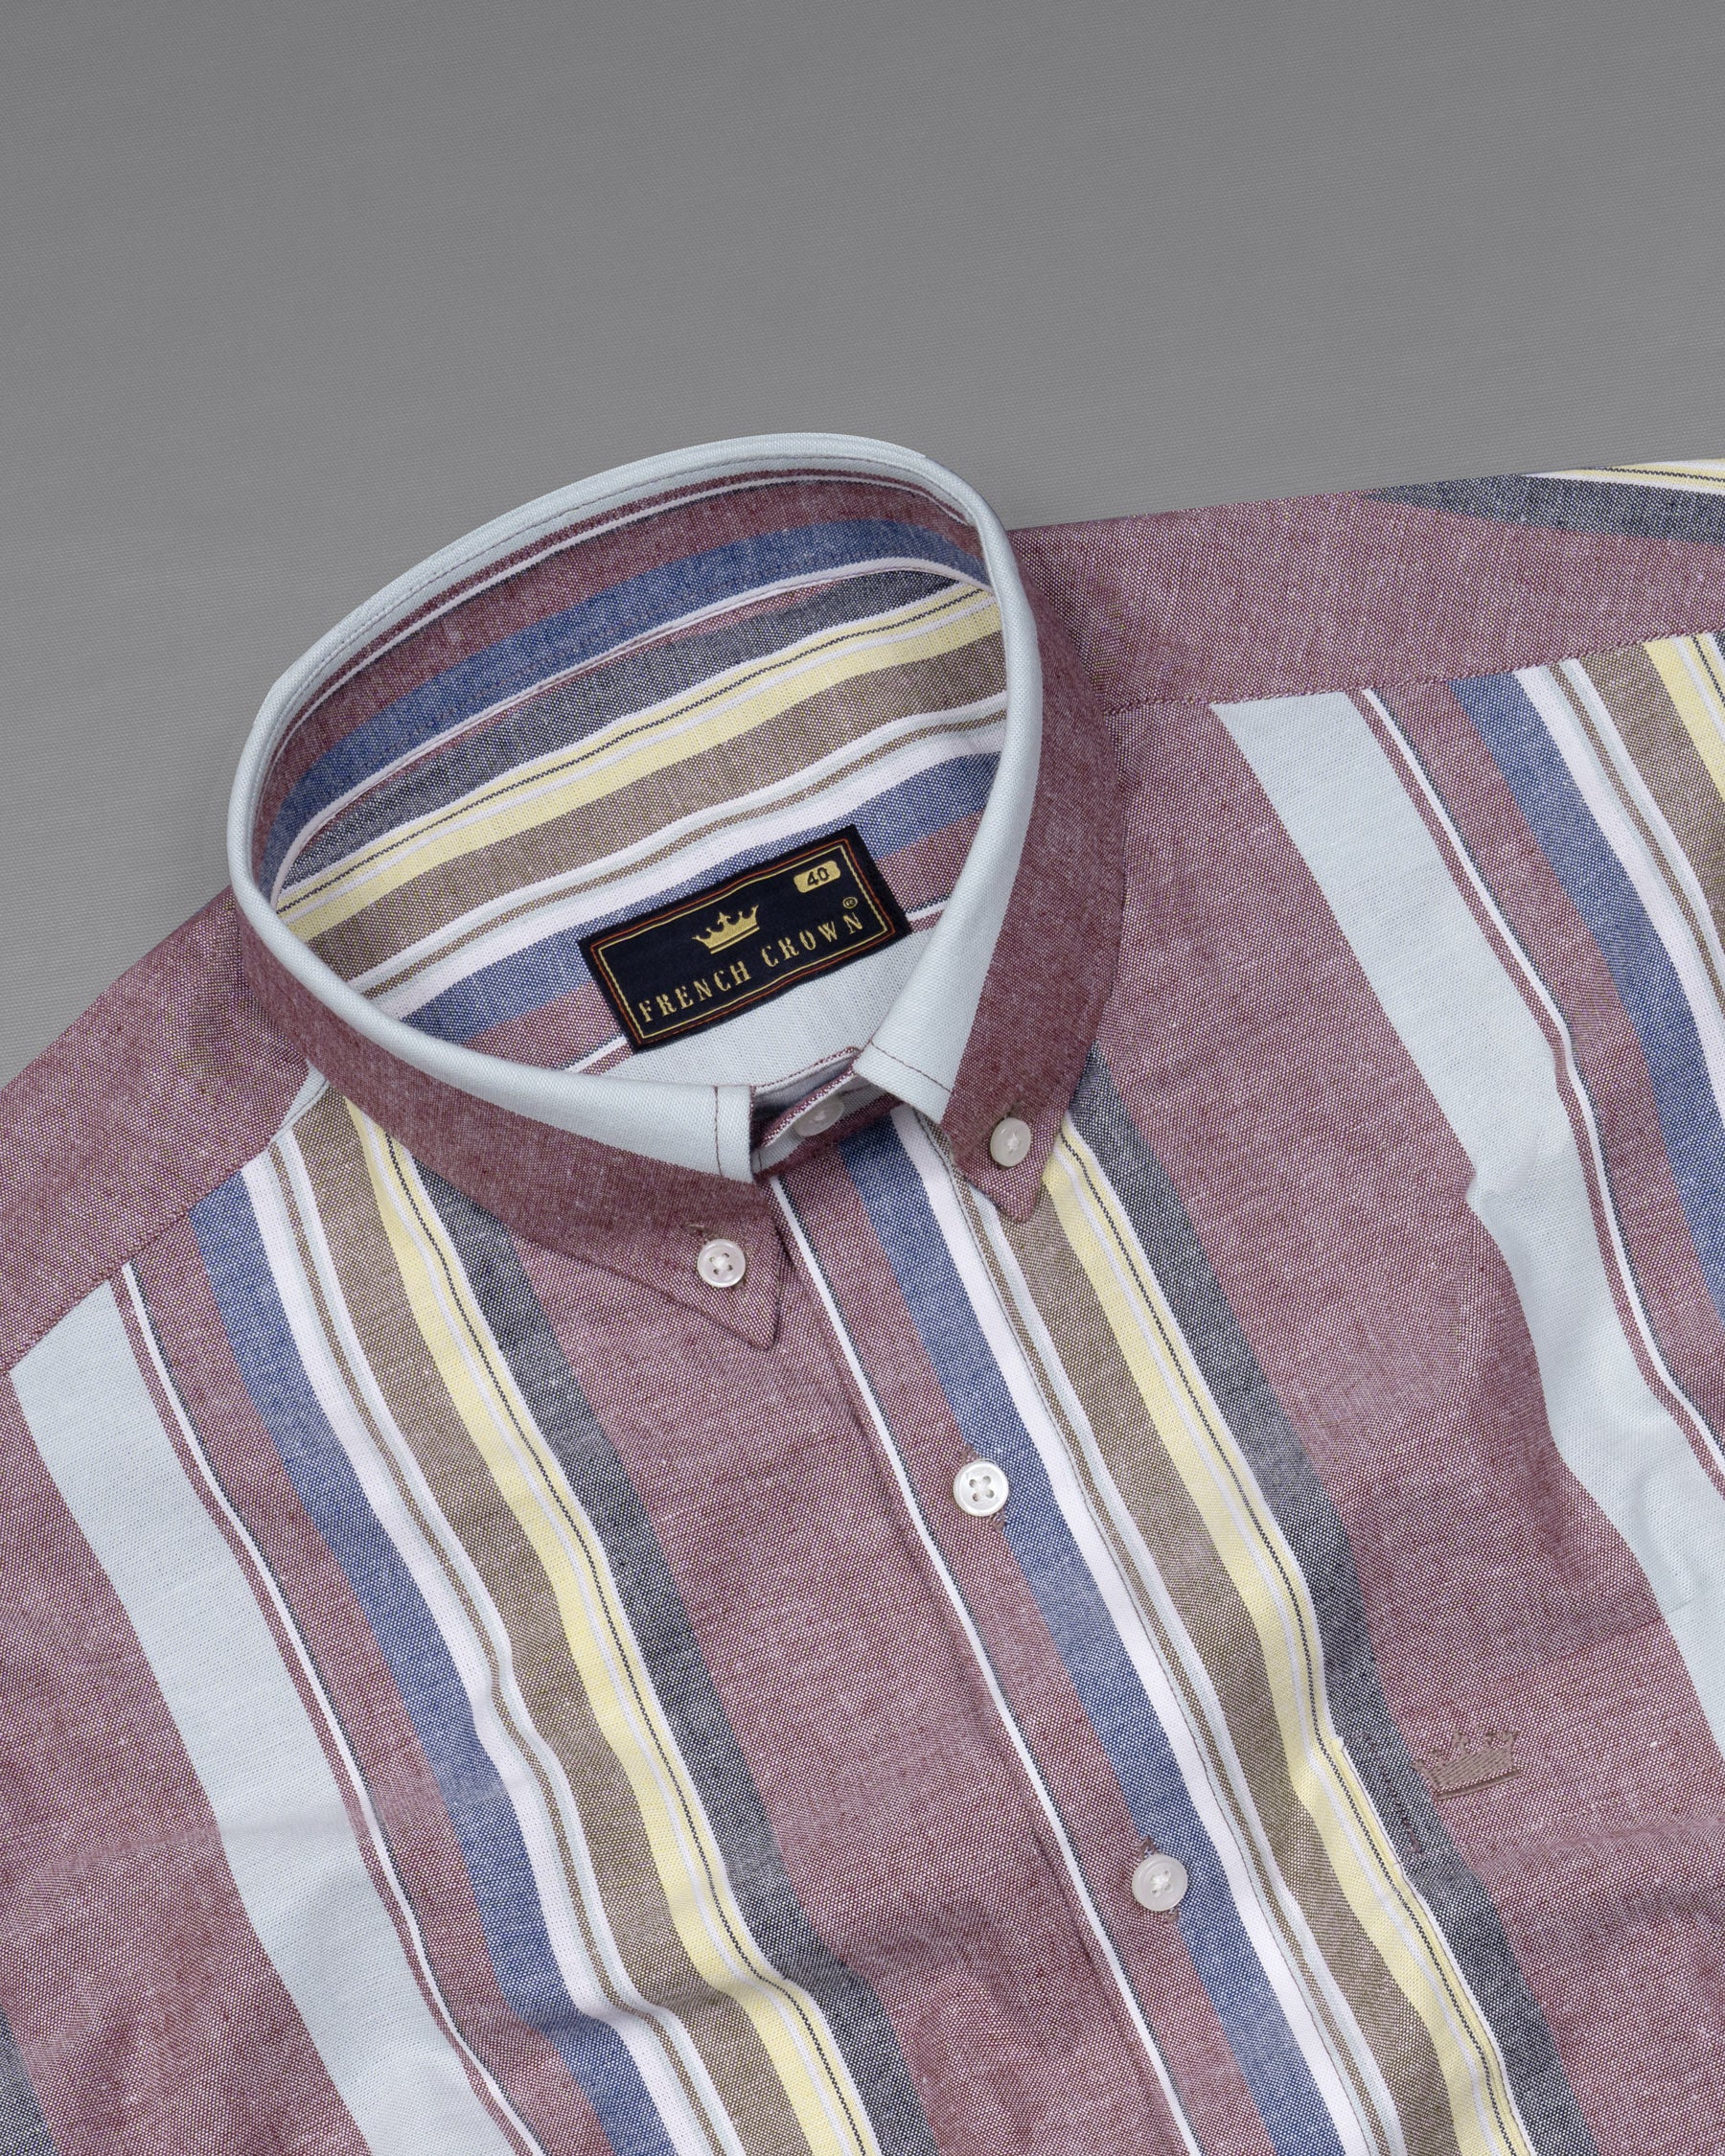 Opium with Dolphin Blue Multicolour Striped Royal Oxford Shirt 5543-BD-38, 5543-BD-H-38, 5543-BD-39, 5543-BD-H-39, 5543-BD-40, 5543-BD-H-40, 5543-BD-42, 5543-BD-H-42, 5543-BD-44, 5543-BD-H-44, 5543-BD-46, 5543-BD-H-46, 5543-BD-48, 5543-BD-H-48, 5543-BD-50, 5543-BD-H-50, 5543-BD-52, 5543-BD-H-52